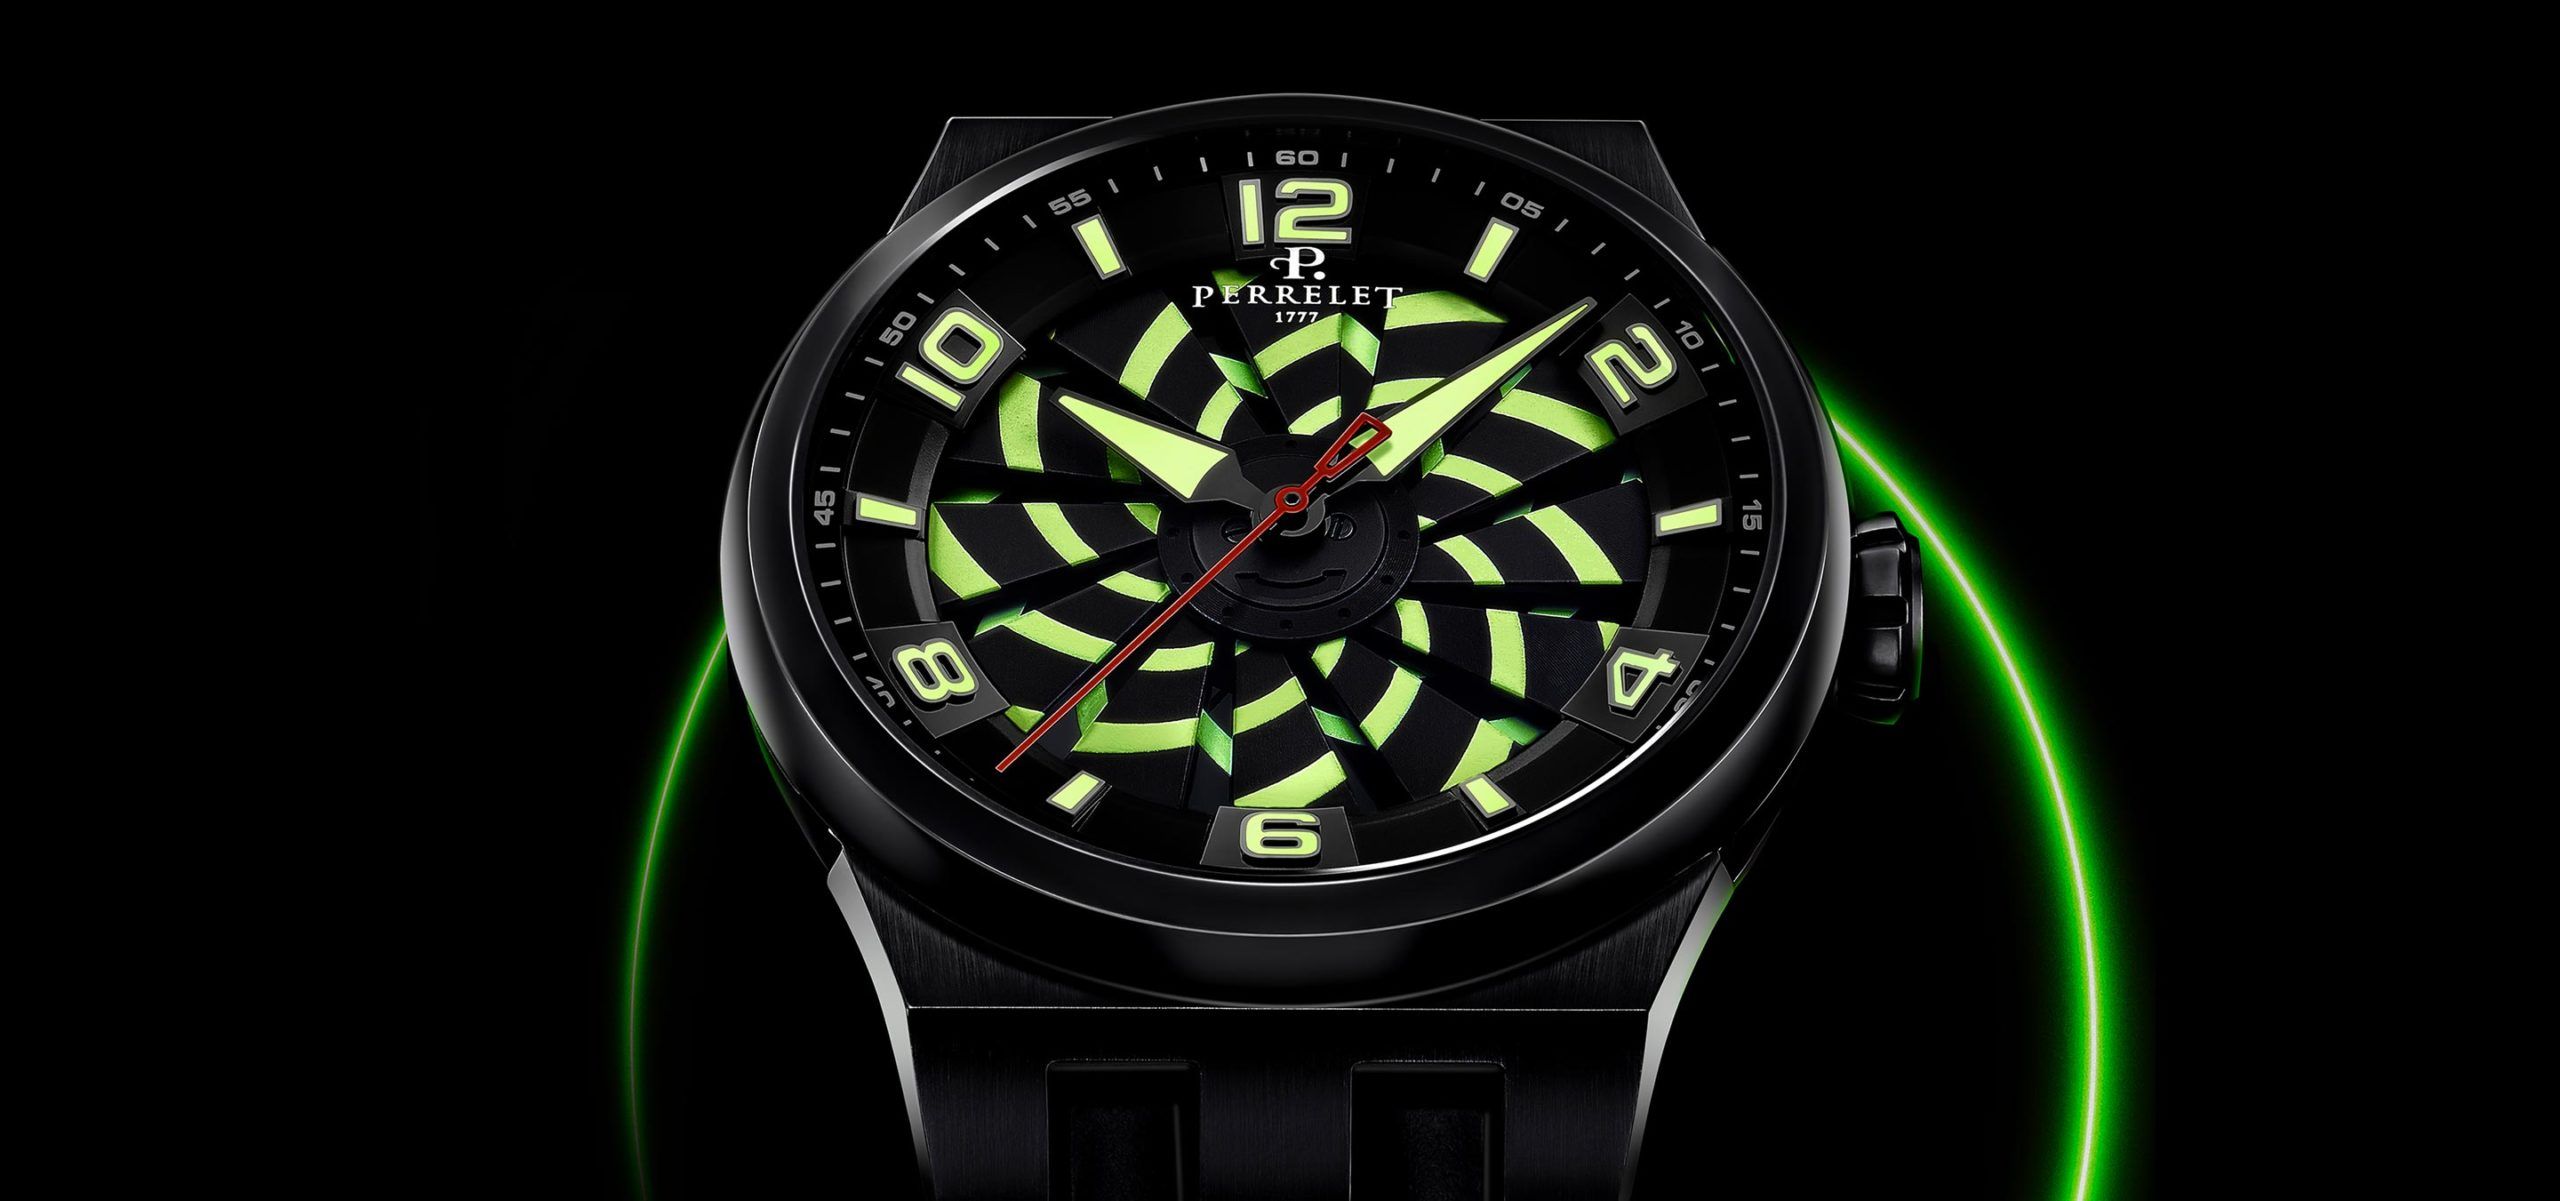 A Glowing Kaleidoscope: Introducing The Captivating Perrelet Turbine Hypnotic Timepiece